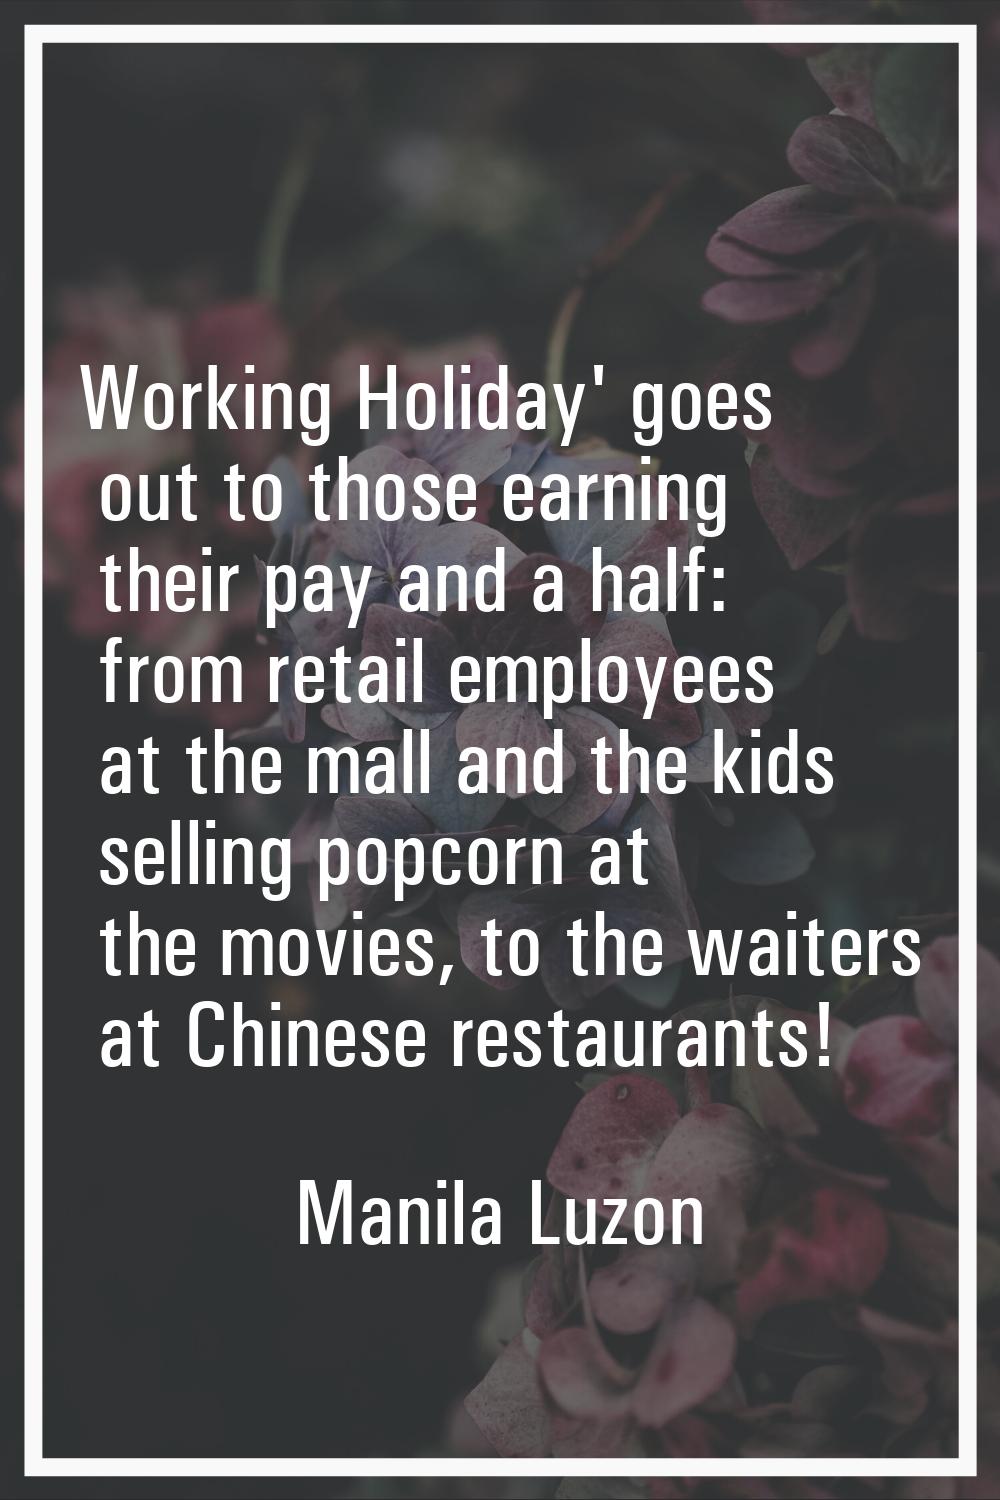 Working Holiday' goes out to those earning their pay and a half: from retail employees at the mall 